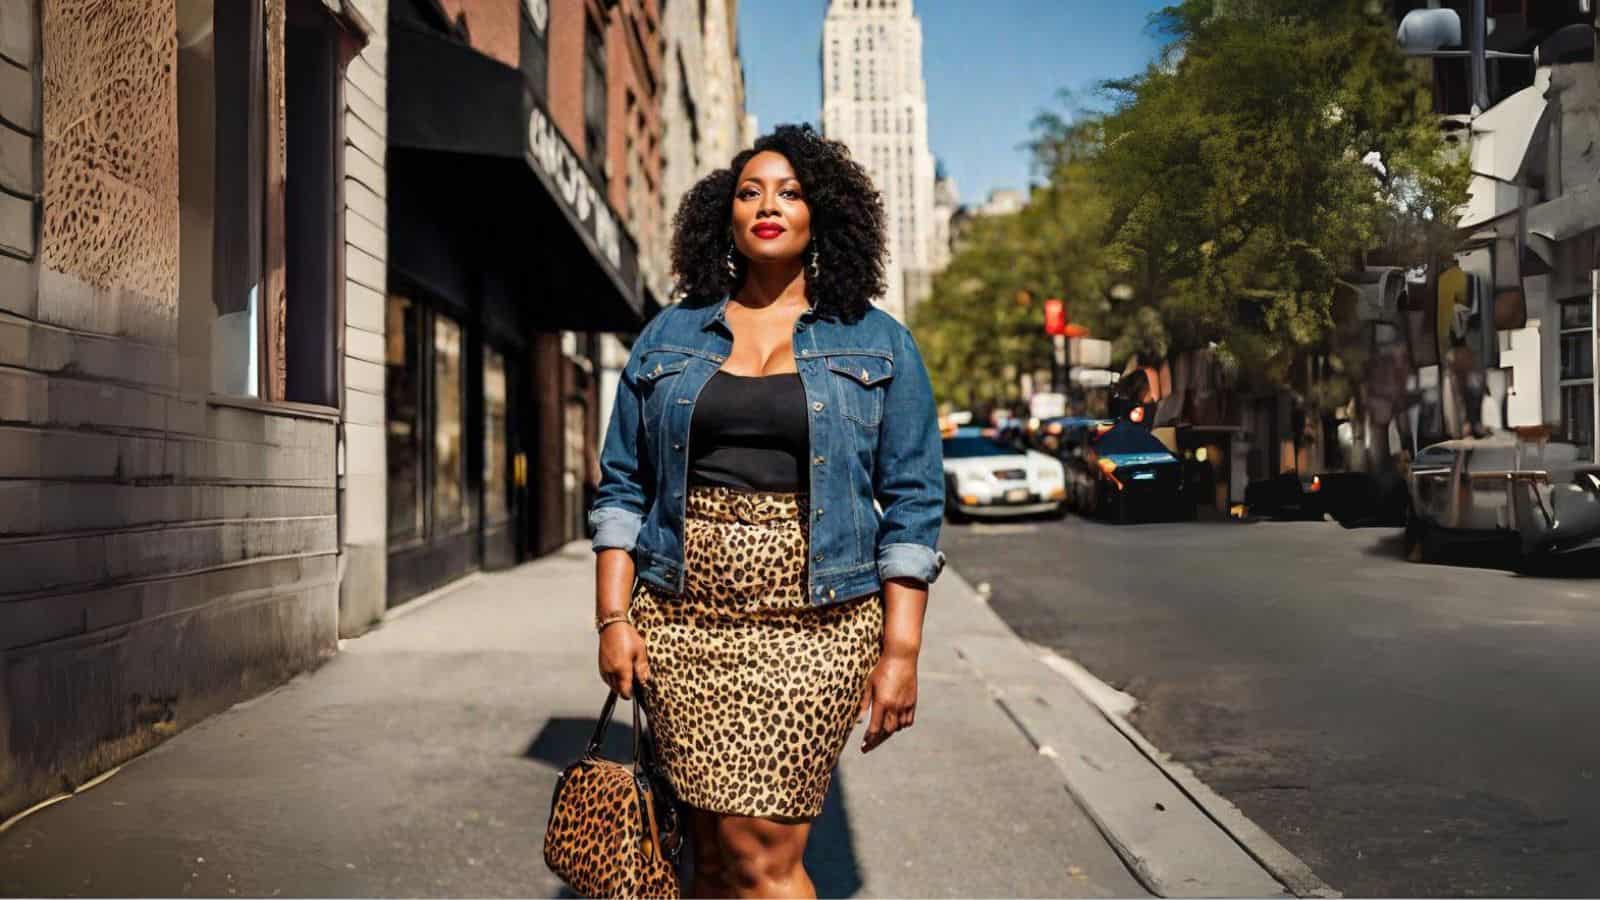 <p>A leopard print skirt is a stunning and bold style choice to pair with your basic denim jacket. If you’d like to keep things casual but at the same time, also want to make a fashion statement, this outfit should be your best bet!</p><p>The contrasting textures also play a significant role in this look because the smoothness of the denim against the texture of the leopard print creates a visually interesting look!</p>